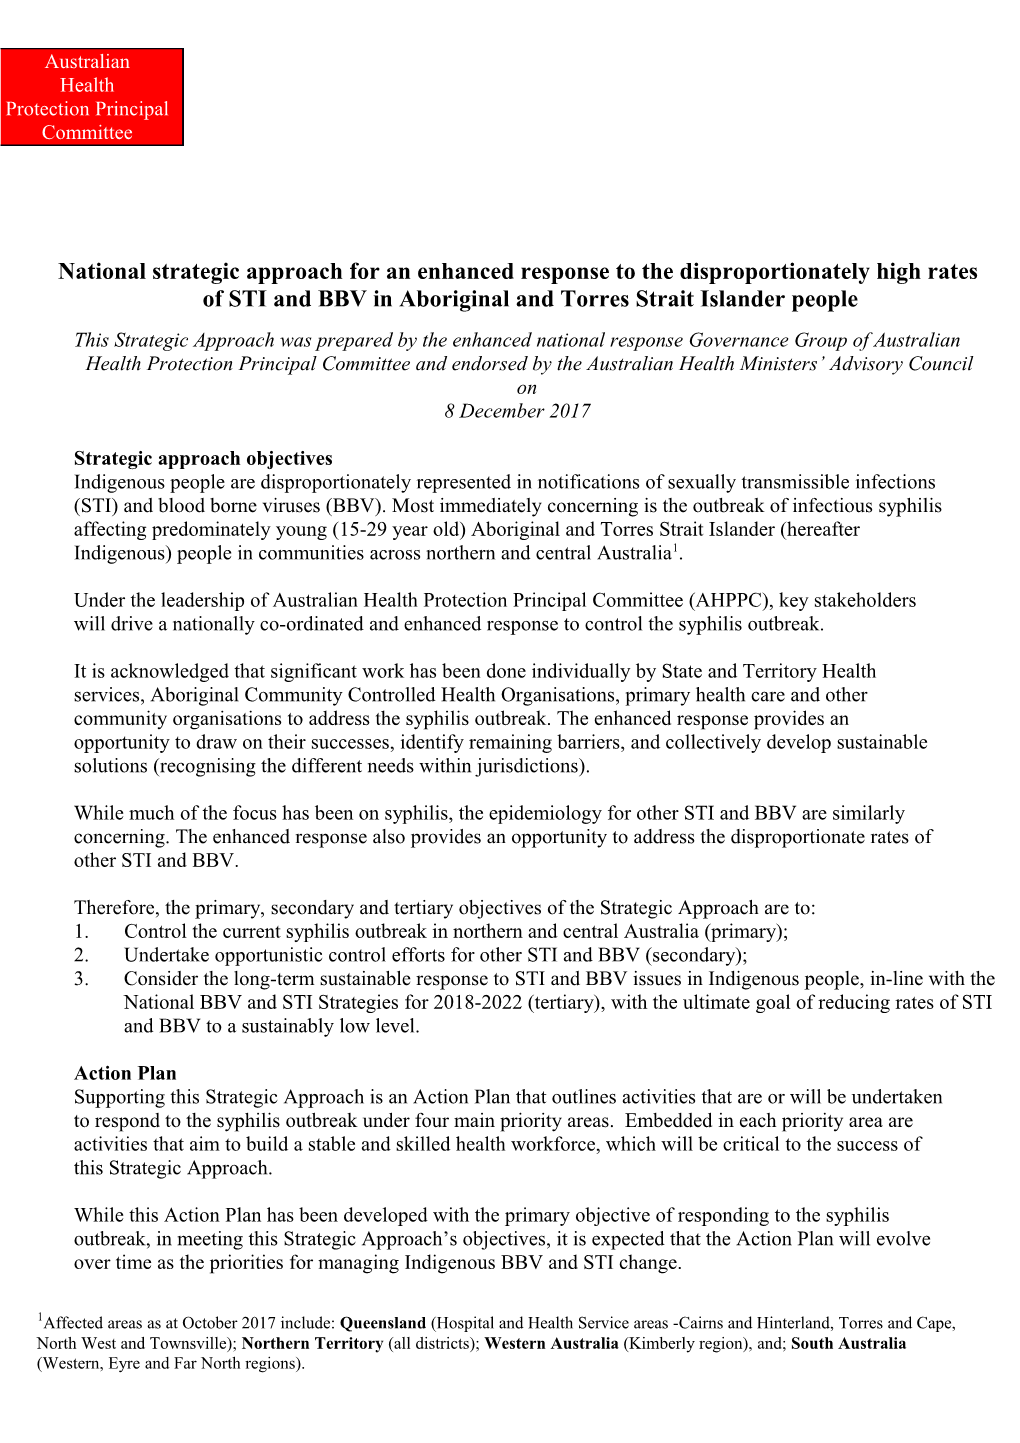 National Strategic Approach for an Enhanced Response to the Disproportionately High Rates